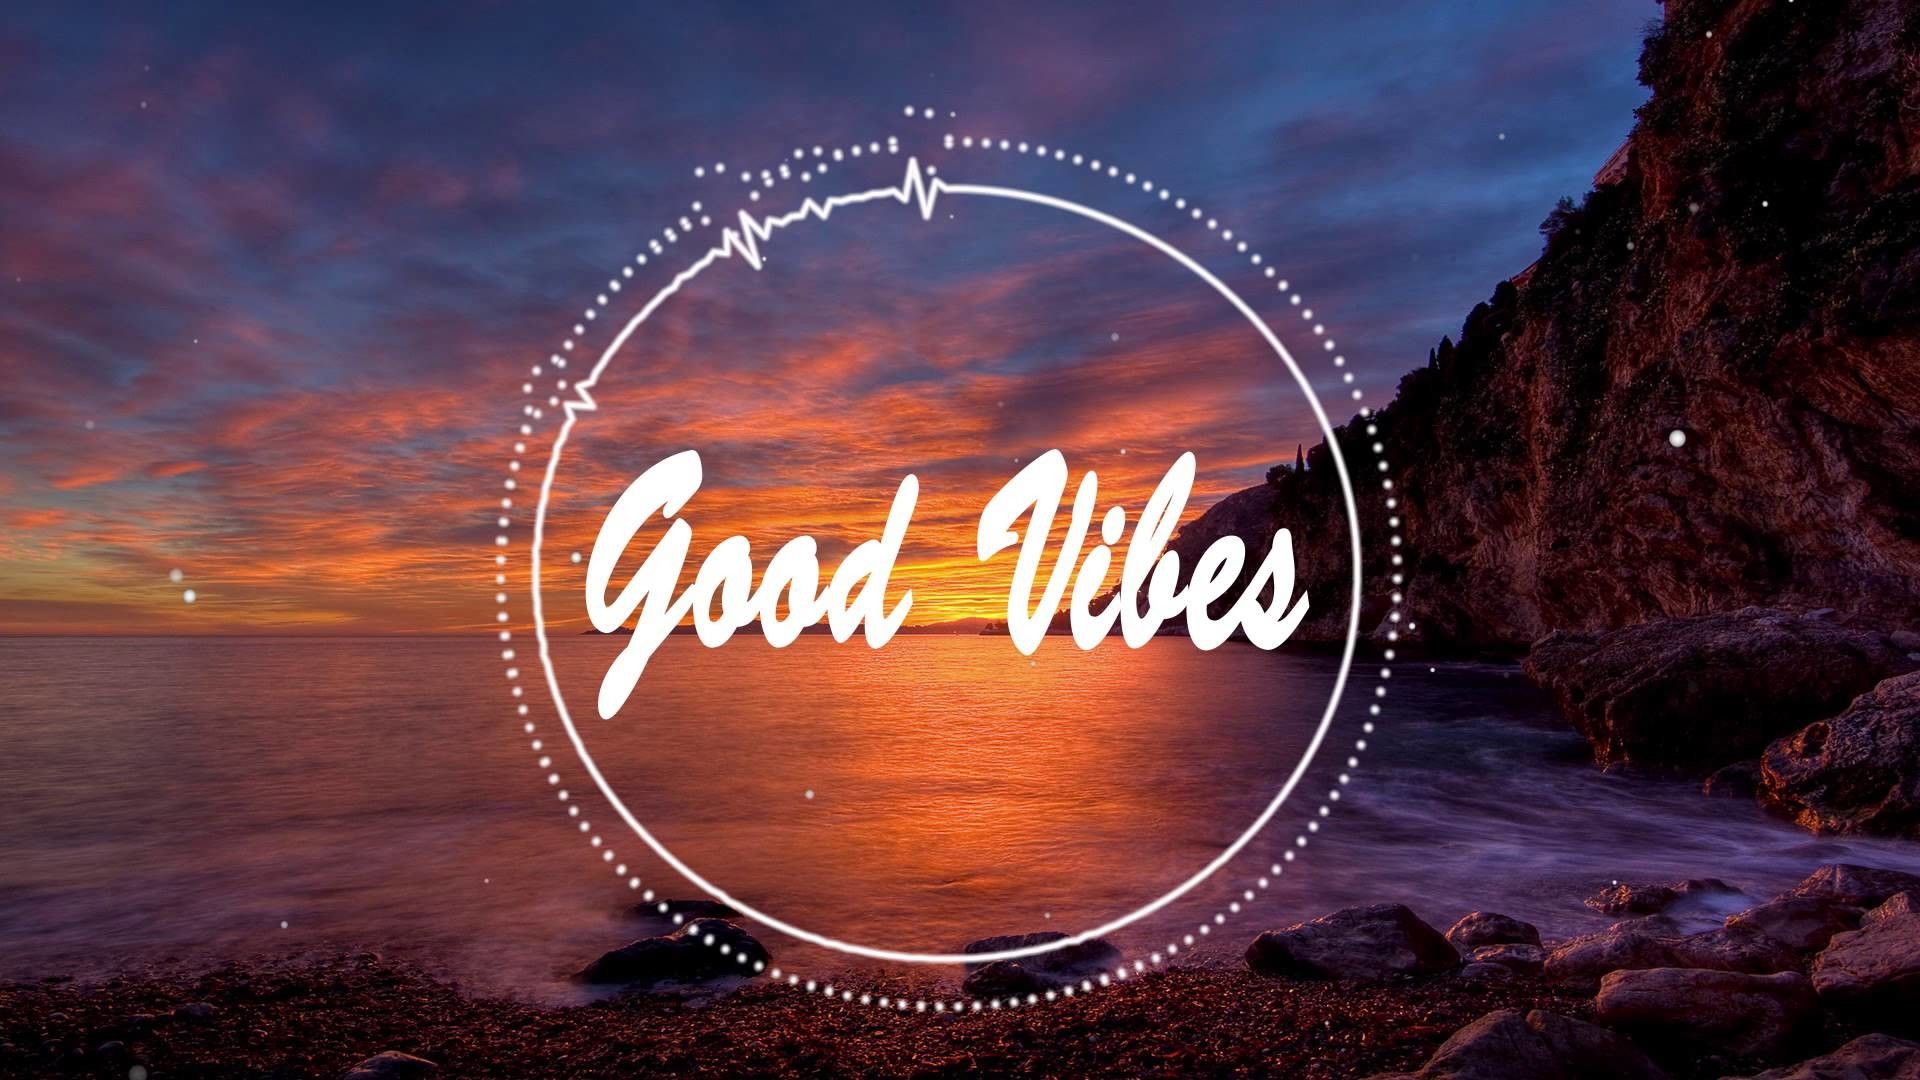 Cool Chill Vibes Wallpapers